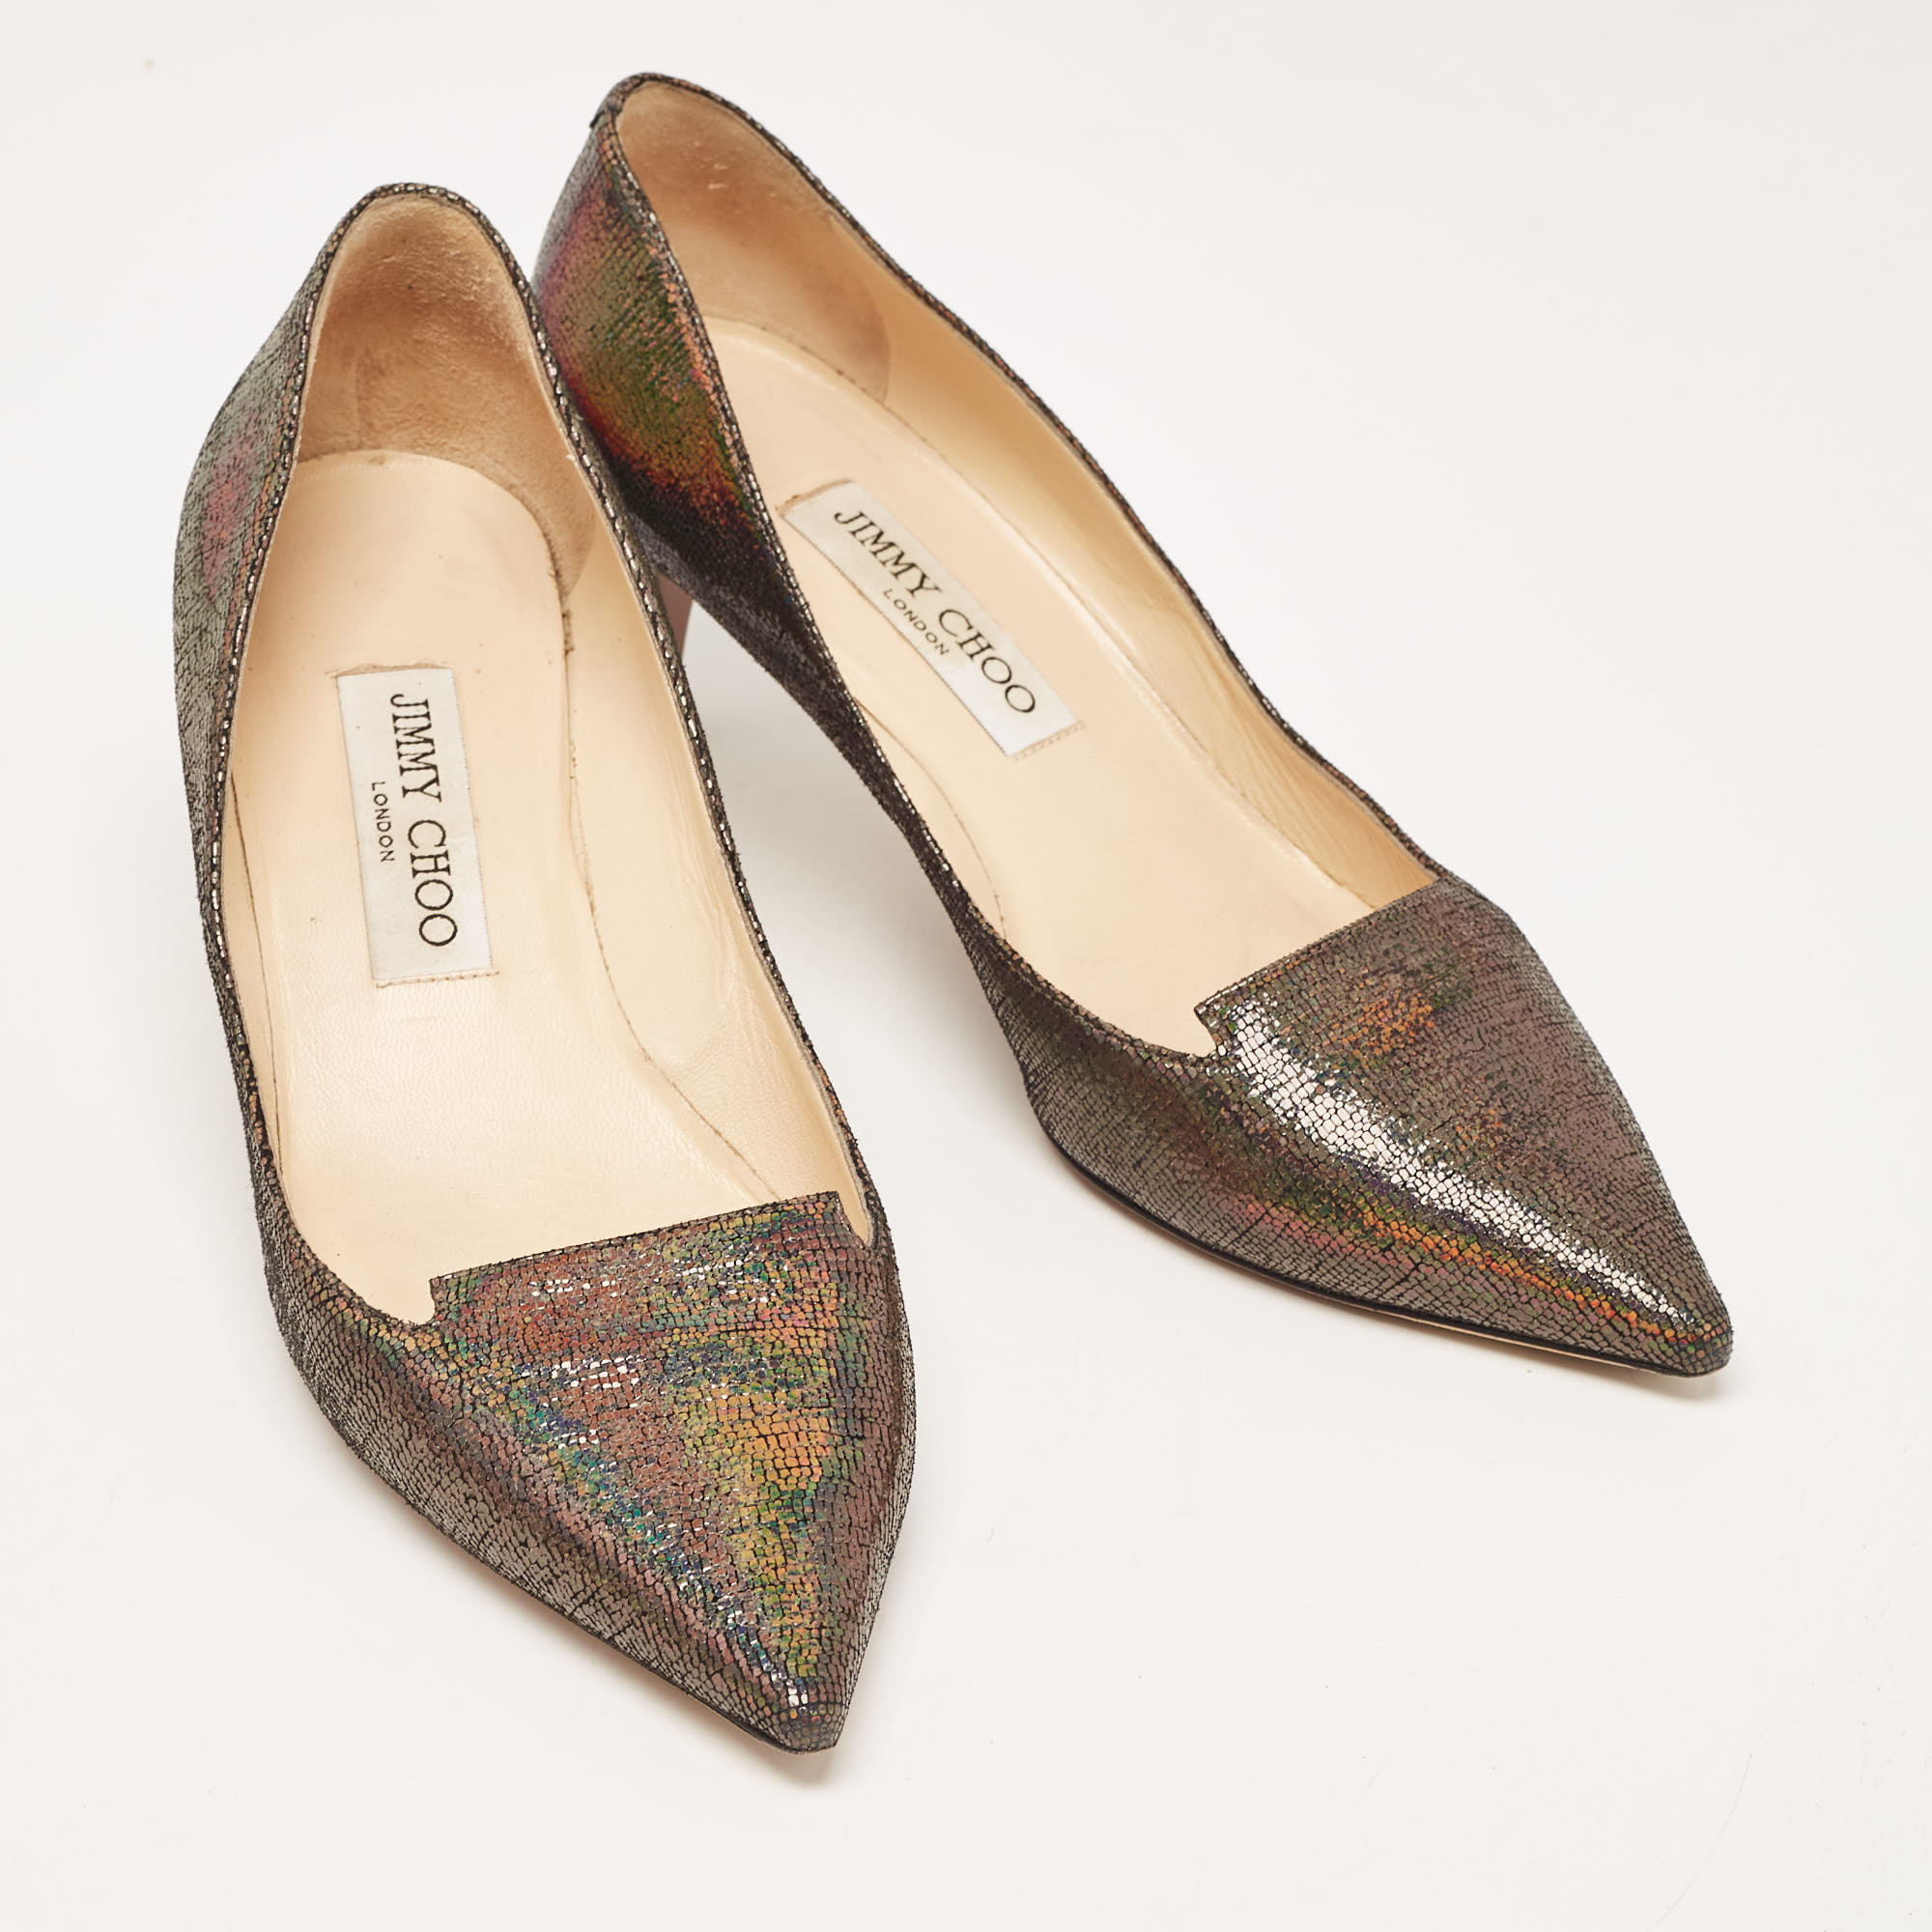 Jimmy Choo Metallic Laminated Suede Allure Pumps Size 38